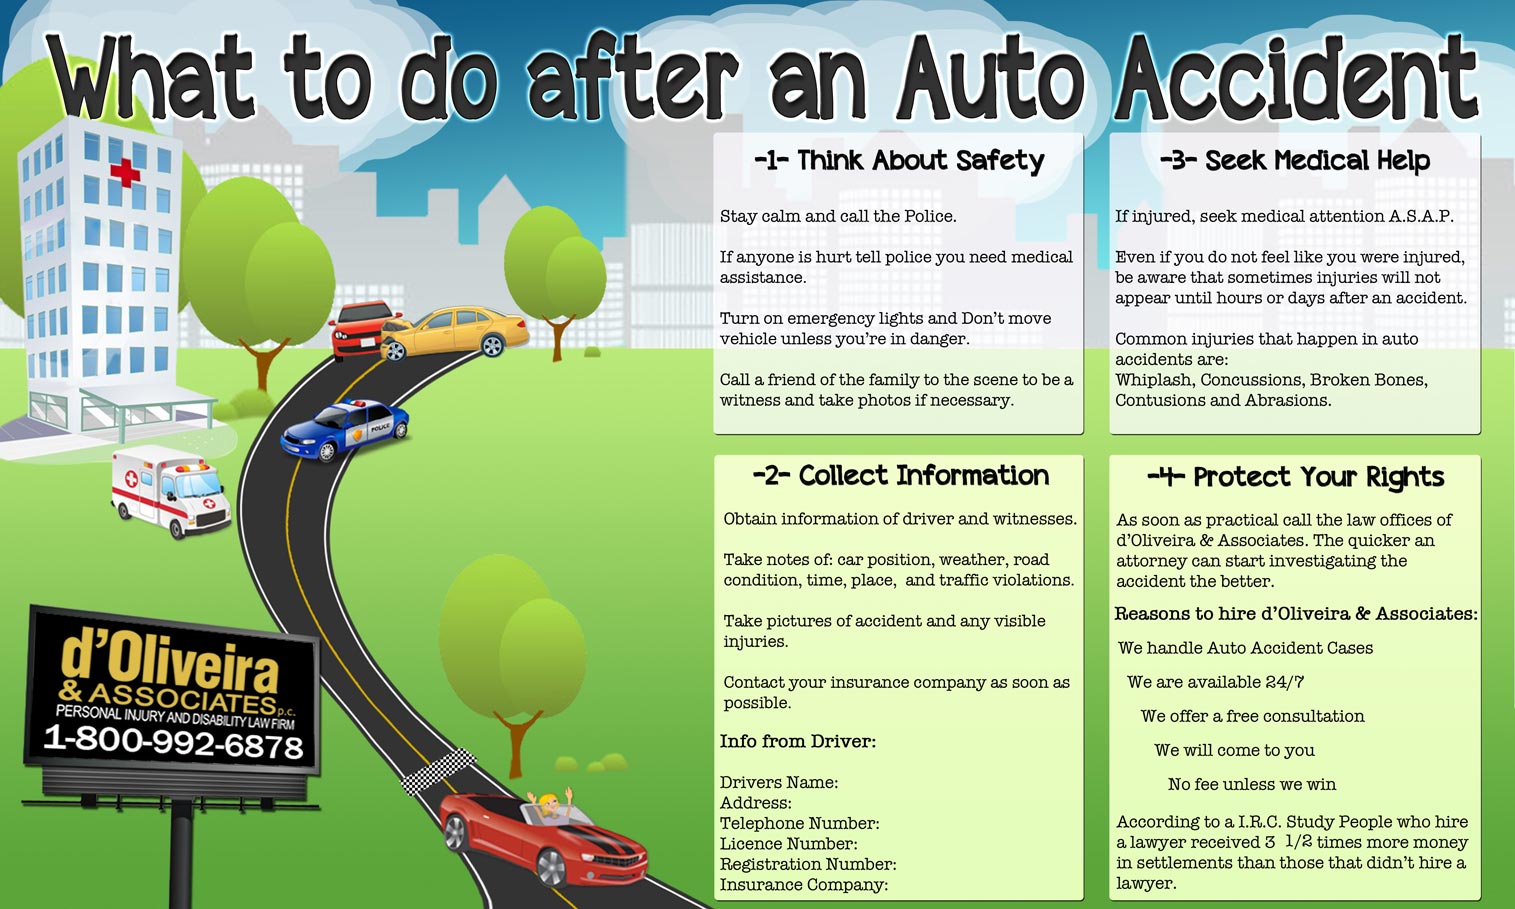 What to do after an Auto Accidents Infographic